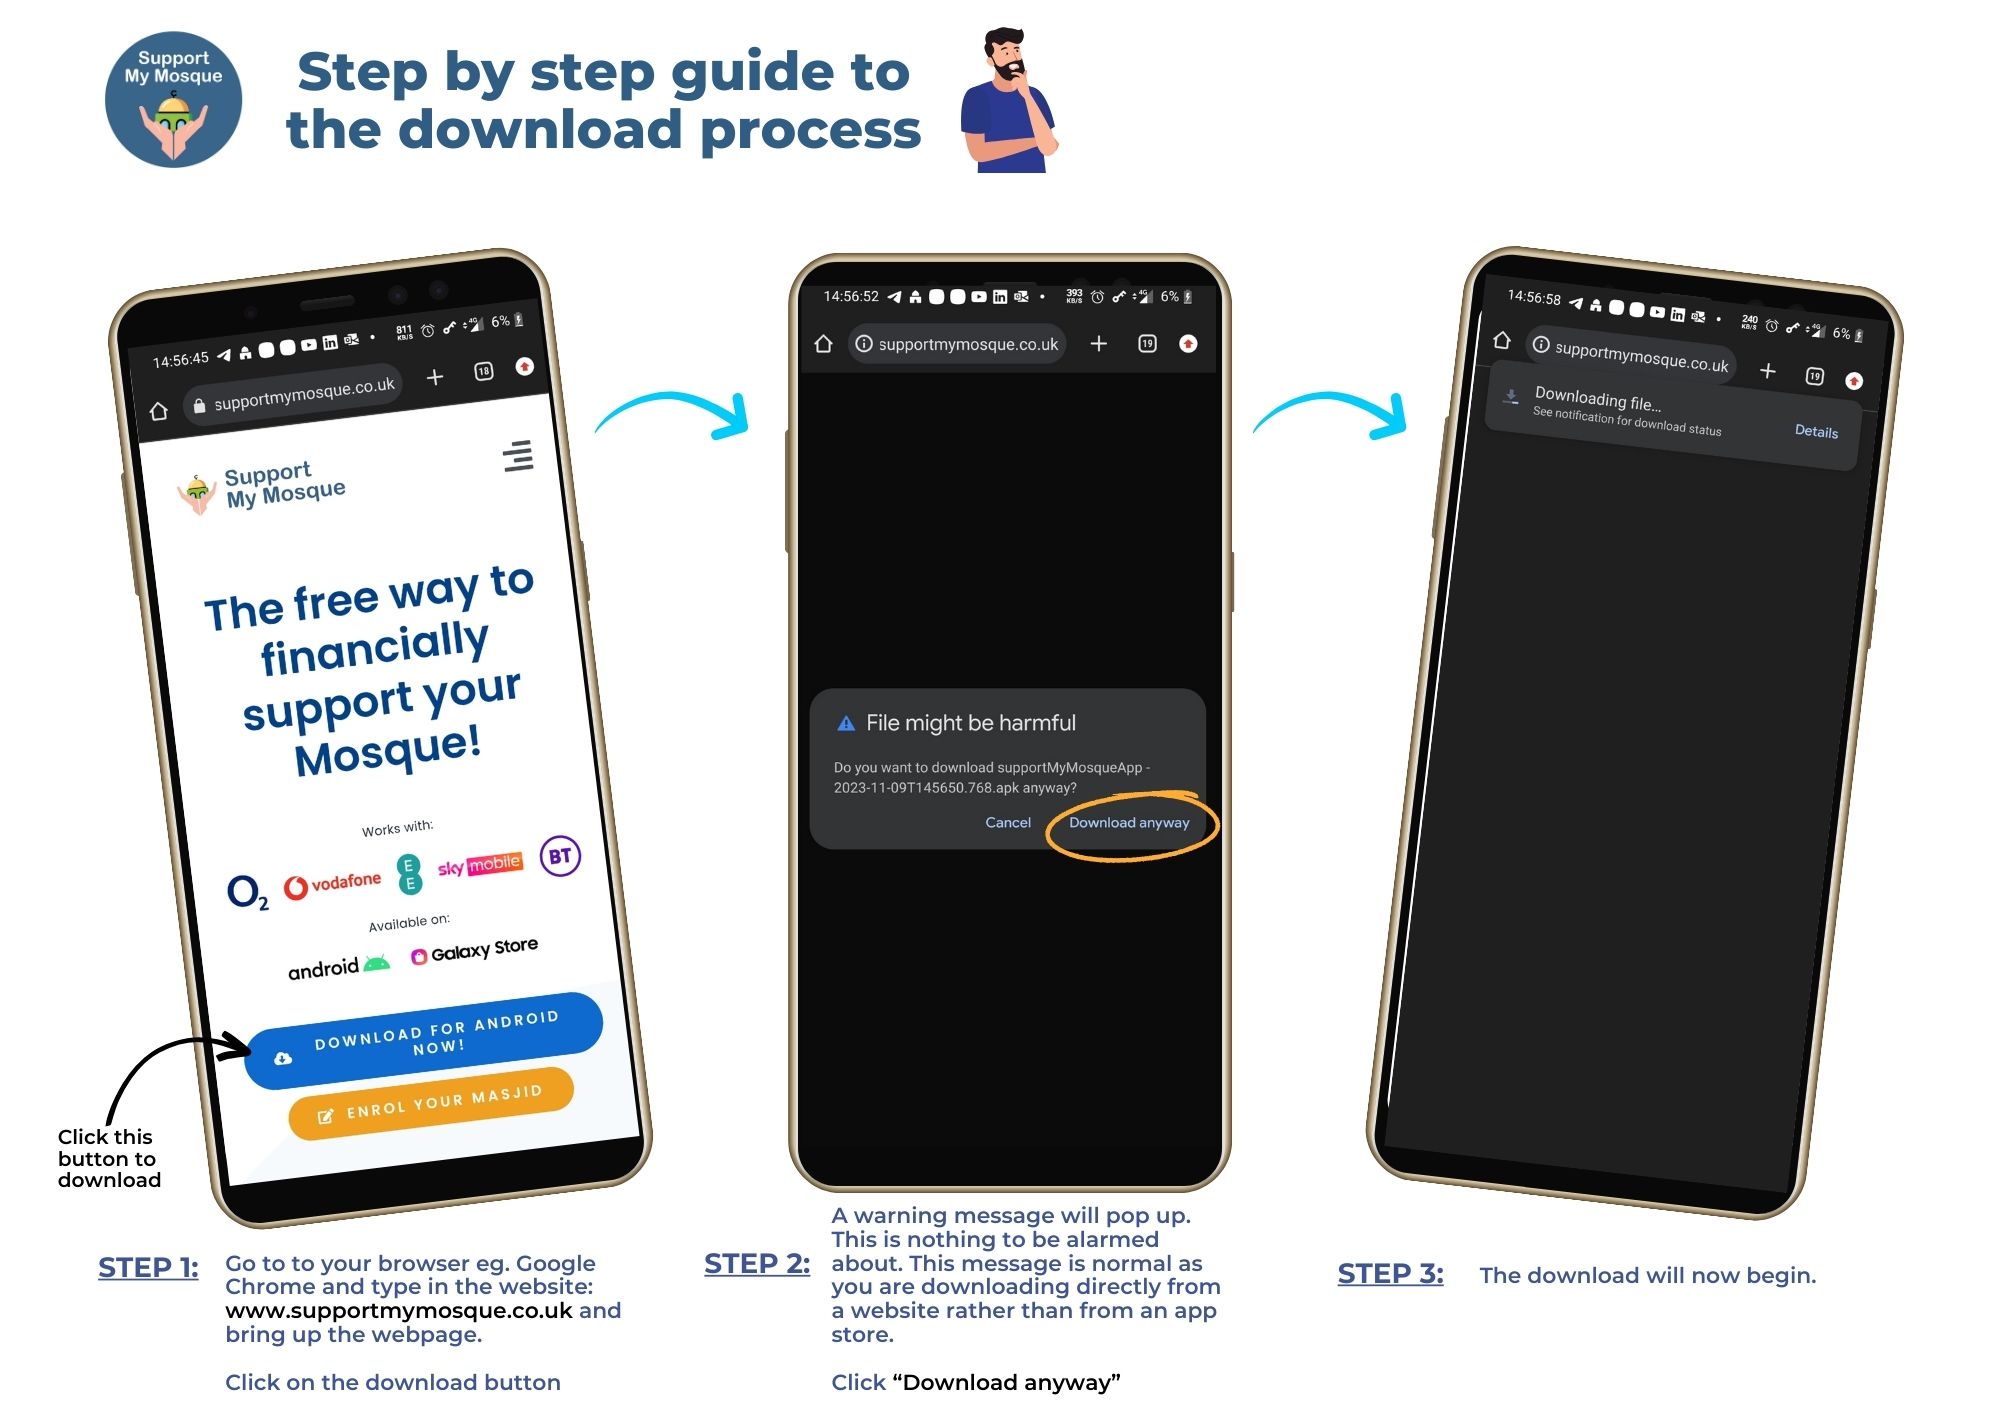 Step by Step Guide to the App download process